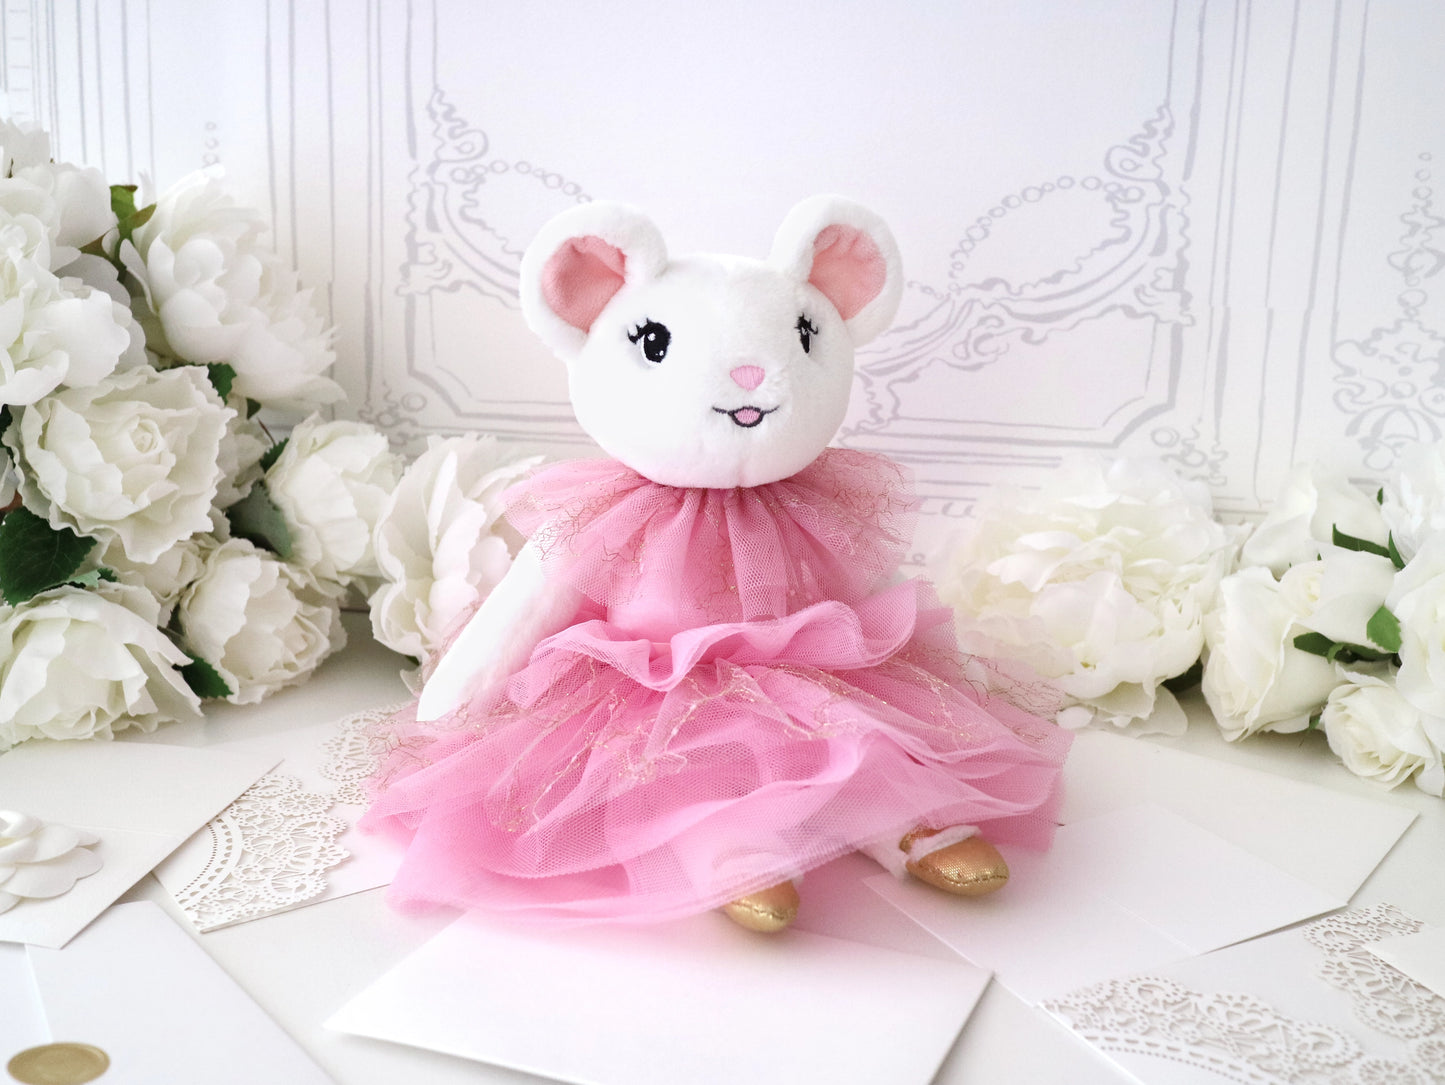 Claris the Chicest Mouse in Paris, 12" Pink Plush Toy